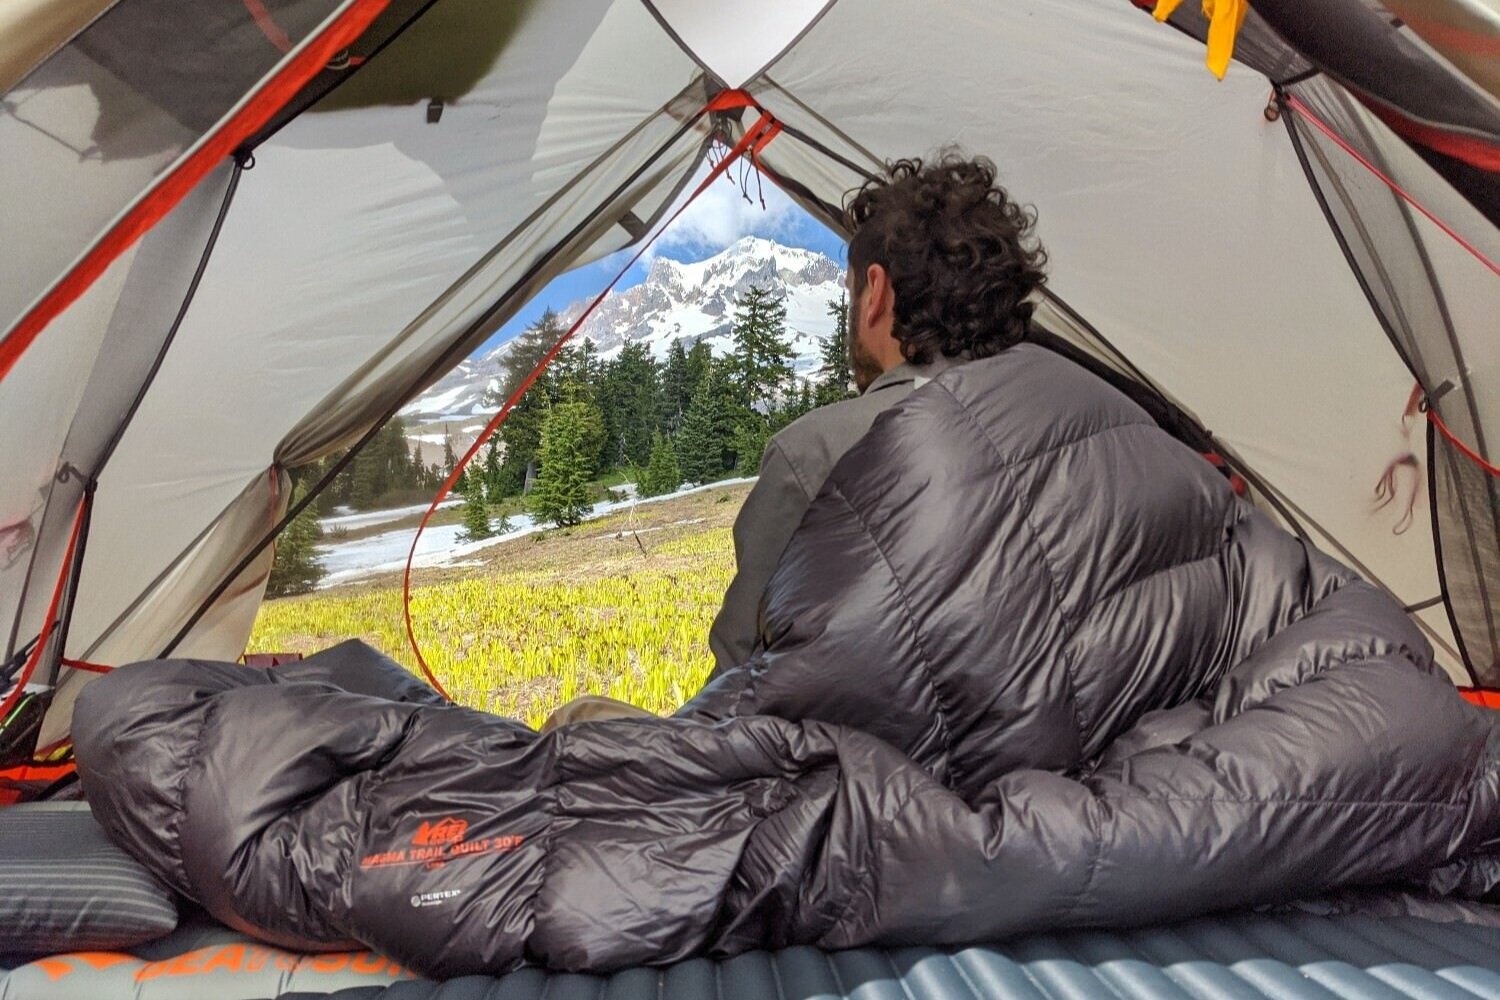 Custom quilts are great, but if you need something quick, the REI Magma Trail Quilt 30 is an awesome value stock quilt that’s lightweight and packable.